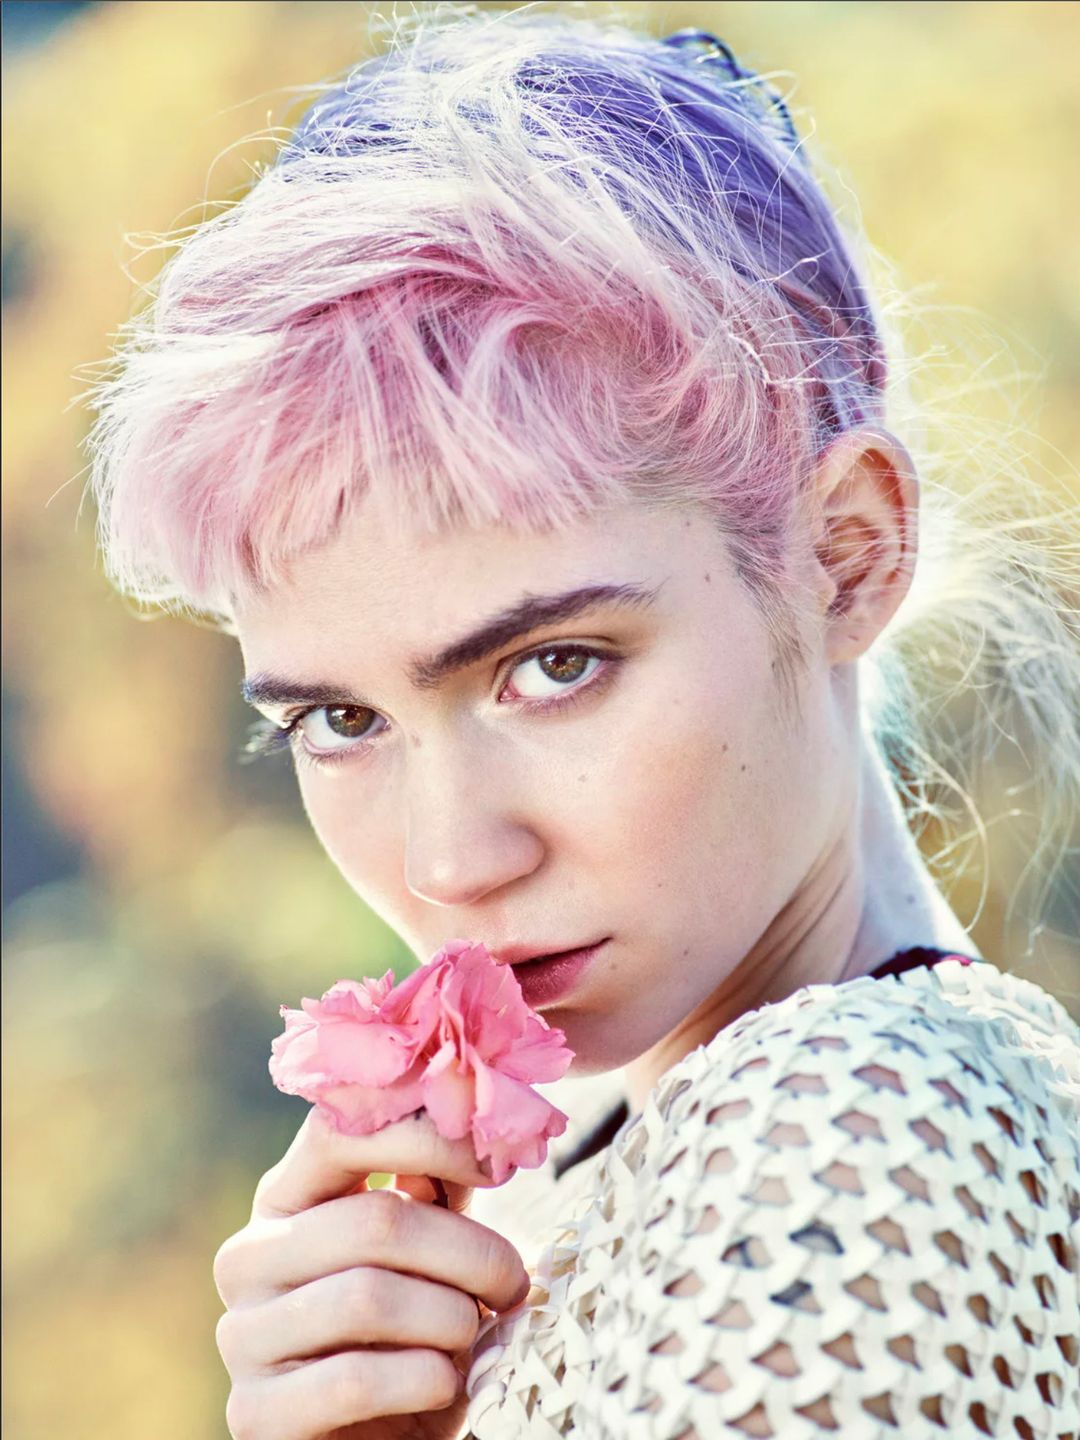 Grimes unphotoshopped pictures